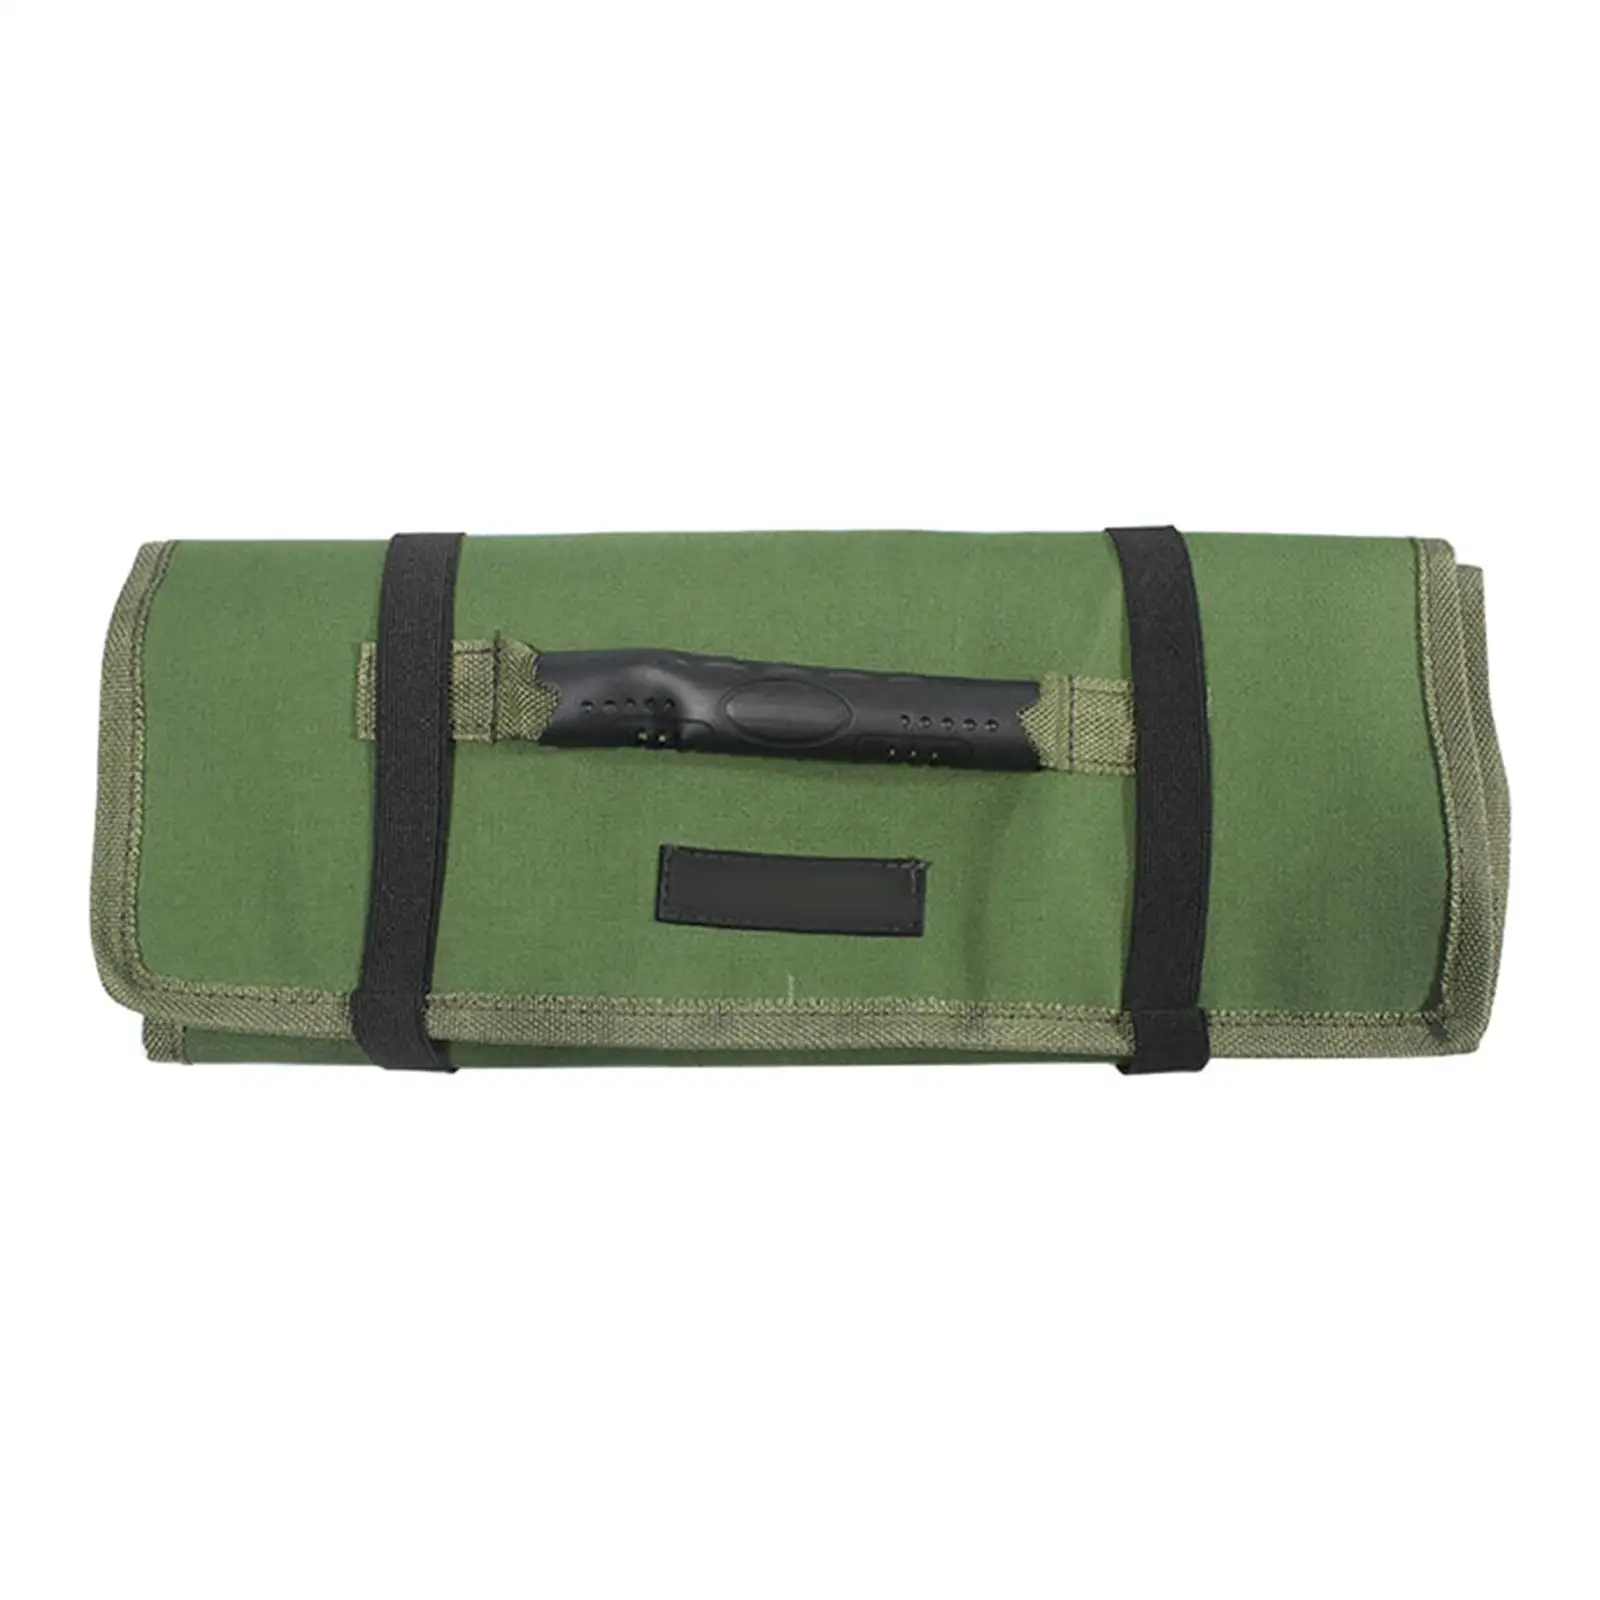 Roll up Tool Bag Organizer Canvas Tool Bag for Wrenches Pliers